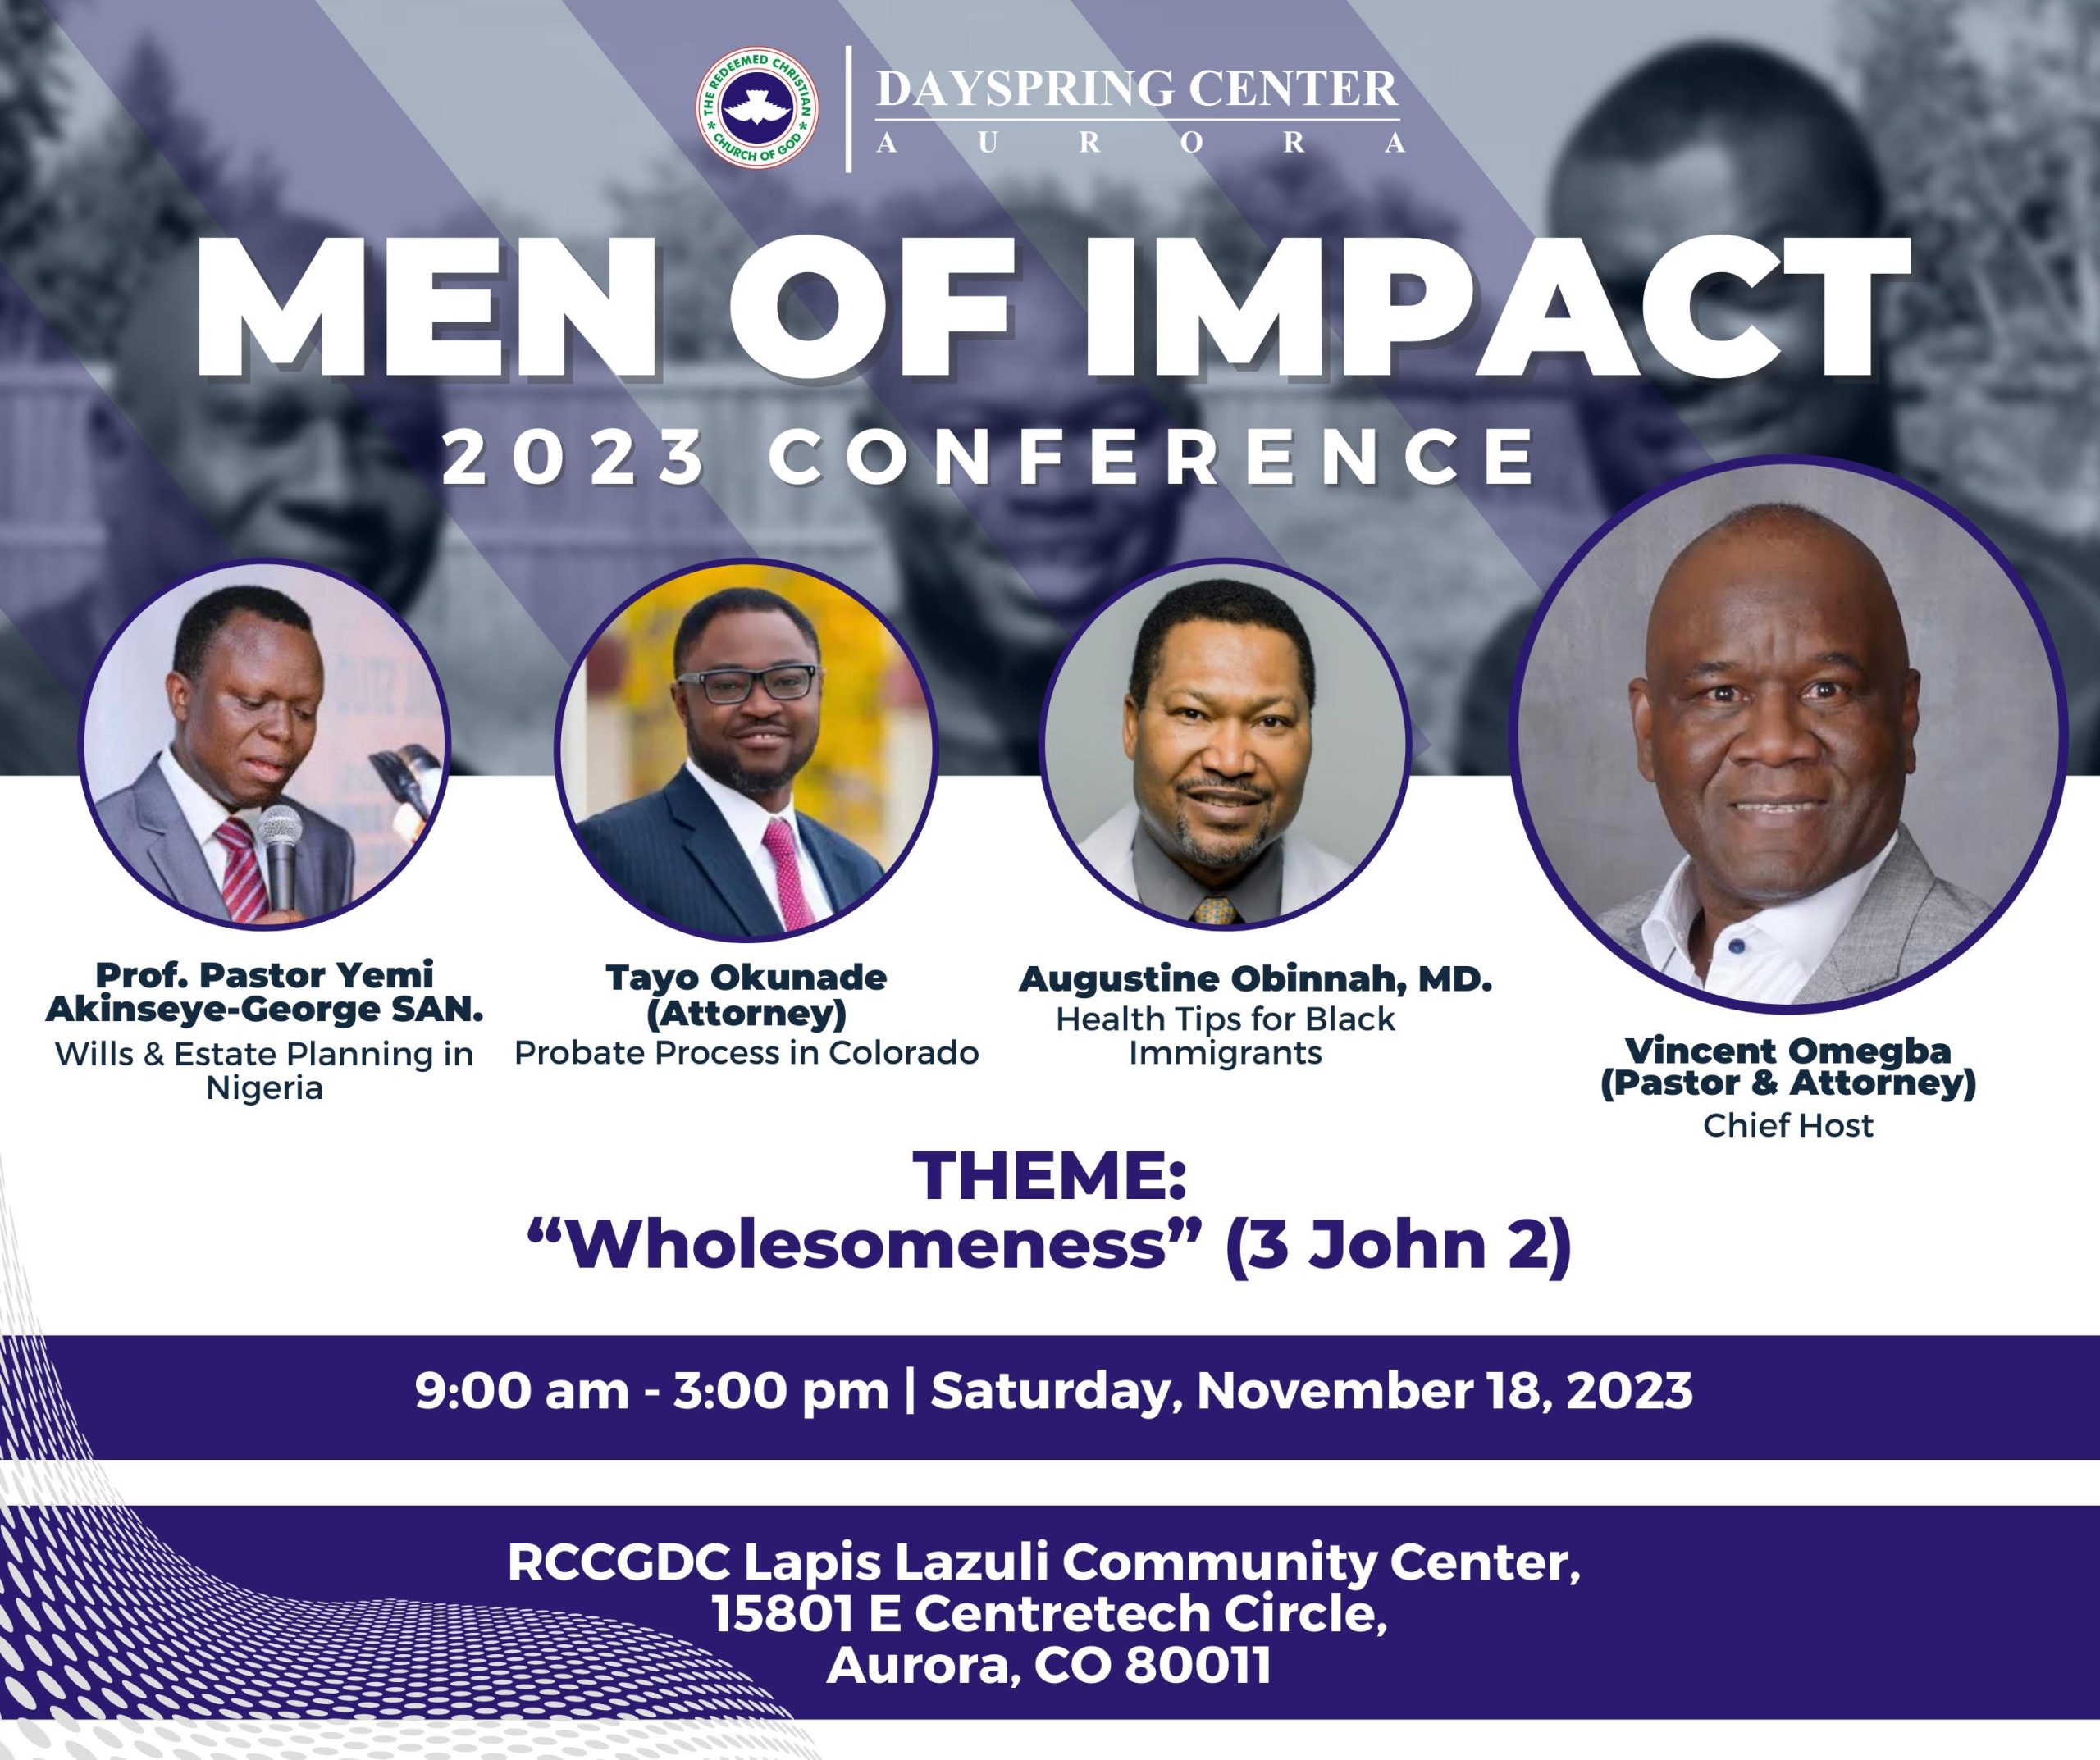 RCCGDC - MEN OF IMPACT CONFERENCE 2023